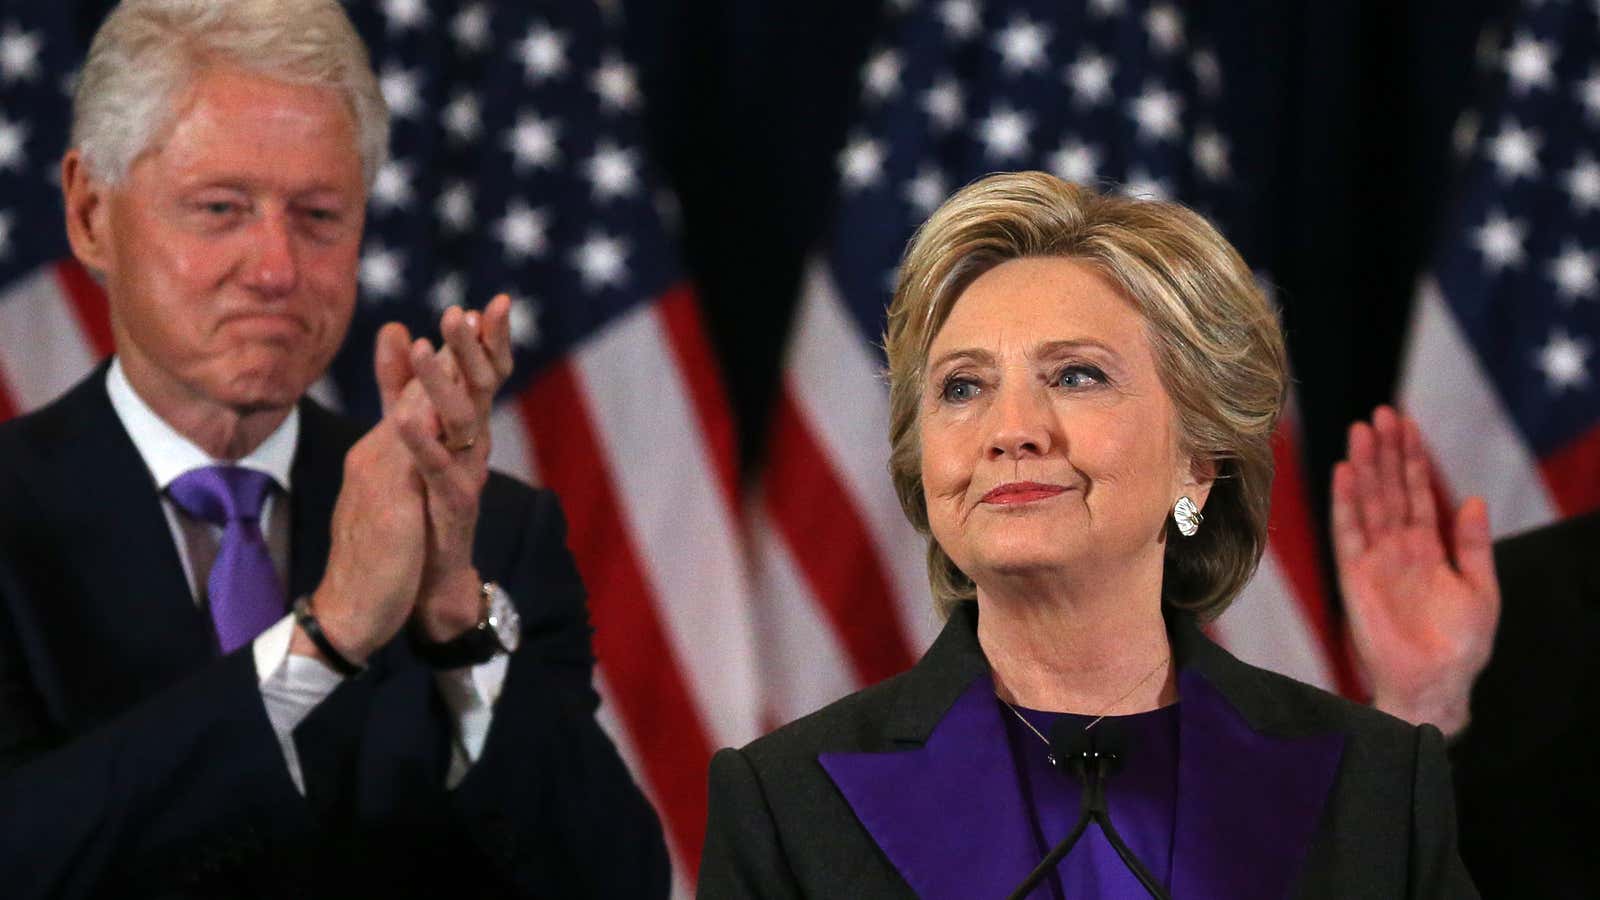 Democratic presidential candidate Hillary Clinton, with her husband, former U.S. President Bill Clinton receives applause at her concession speech.